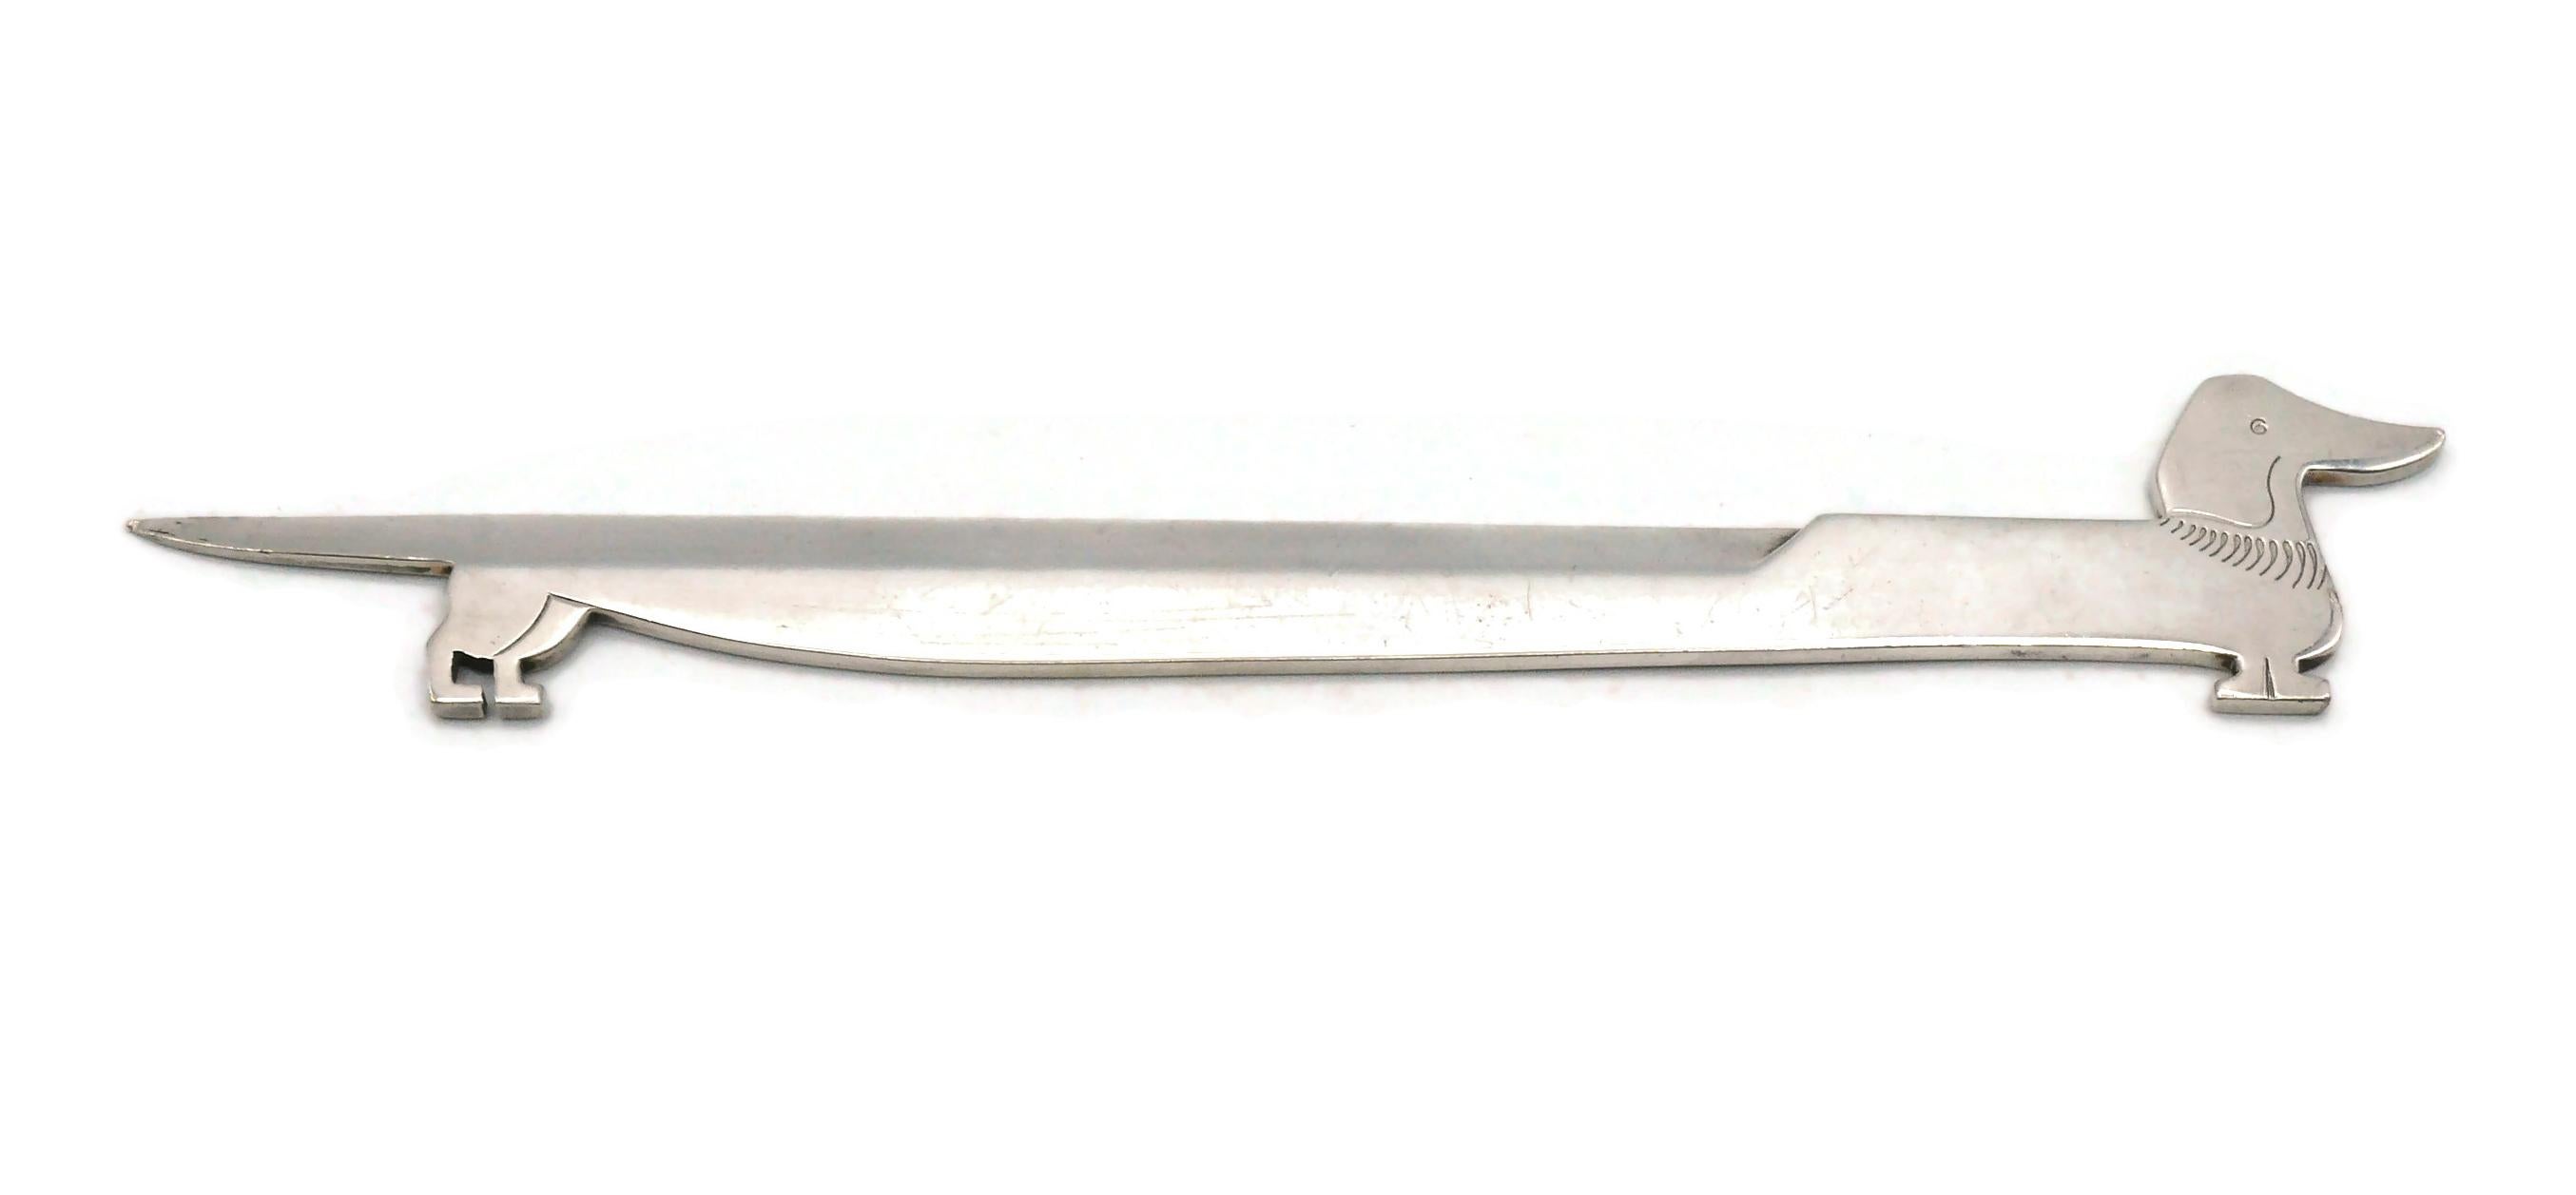 HERMES Paris vintage silver plate dachshund letter opener.

Embossed HERMES PARIS.
RAVINET D'ENFERT hallmark.

Indicative measurements : max. length approx. 23 cm (9.06 inches) / max. width 3.7 cm (1.46 inches).

Material : Silver plate metal